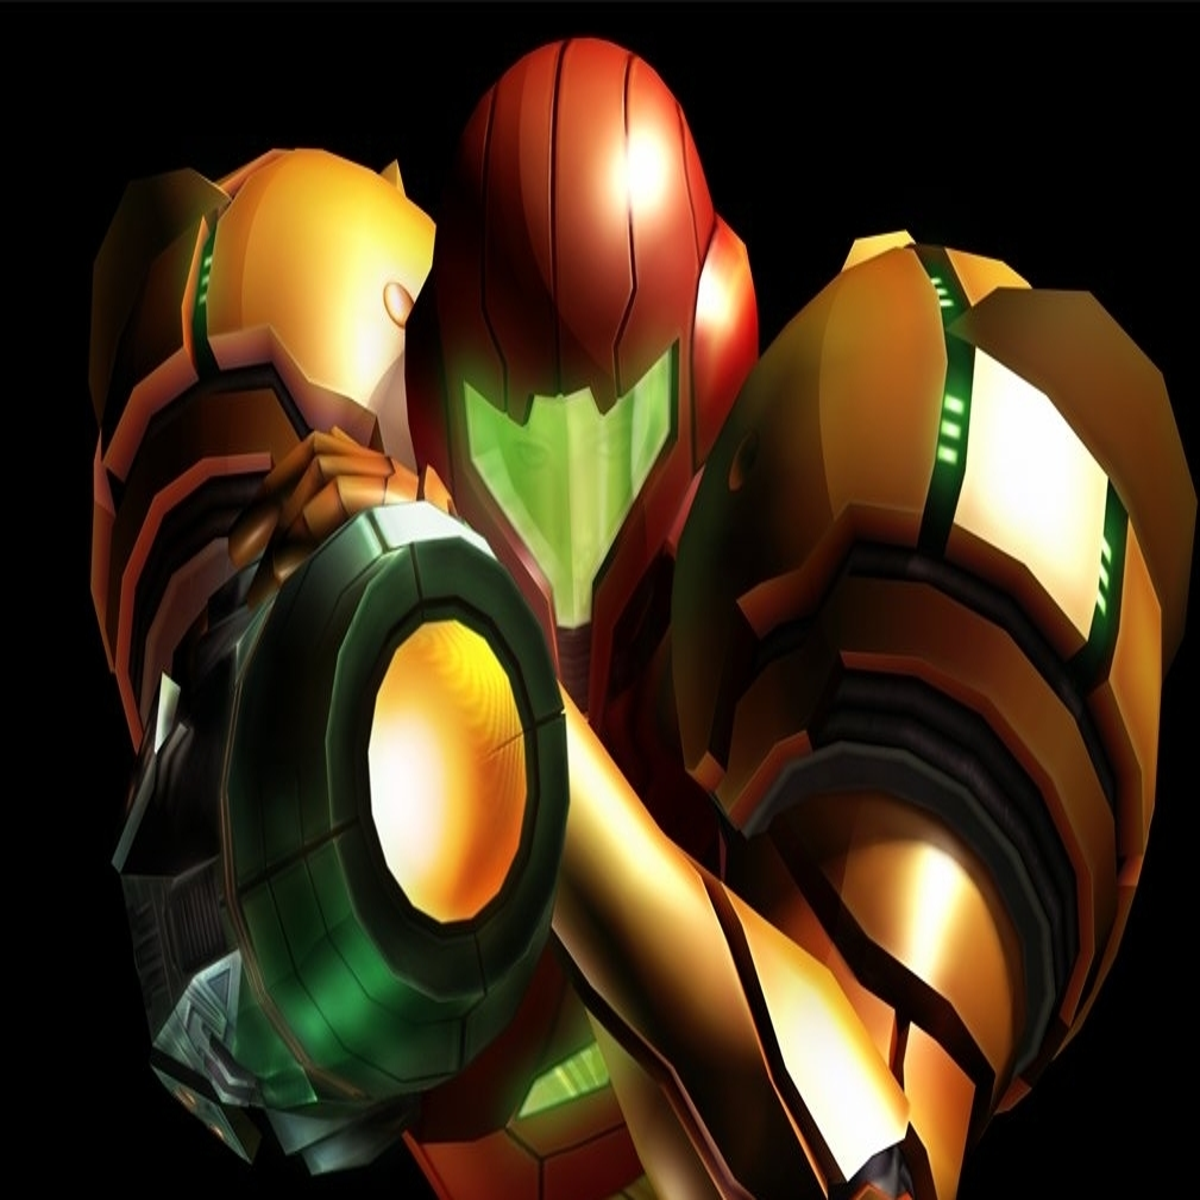 Metroid Prime Remastered is coming to the Switch today - The Verge